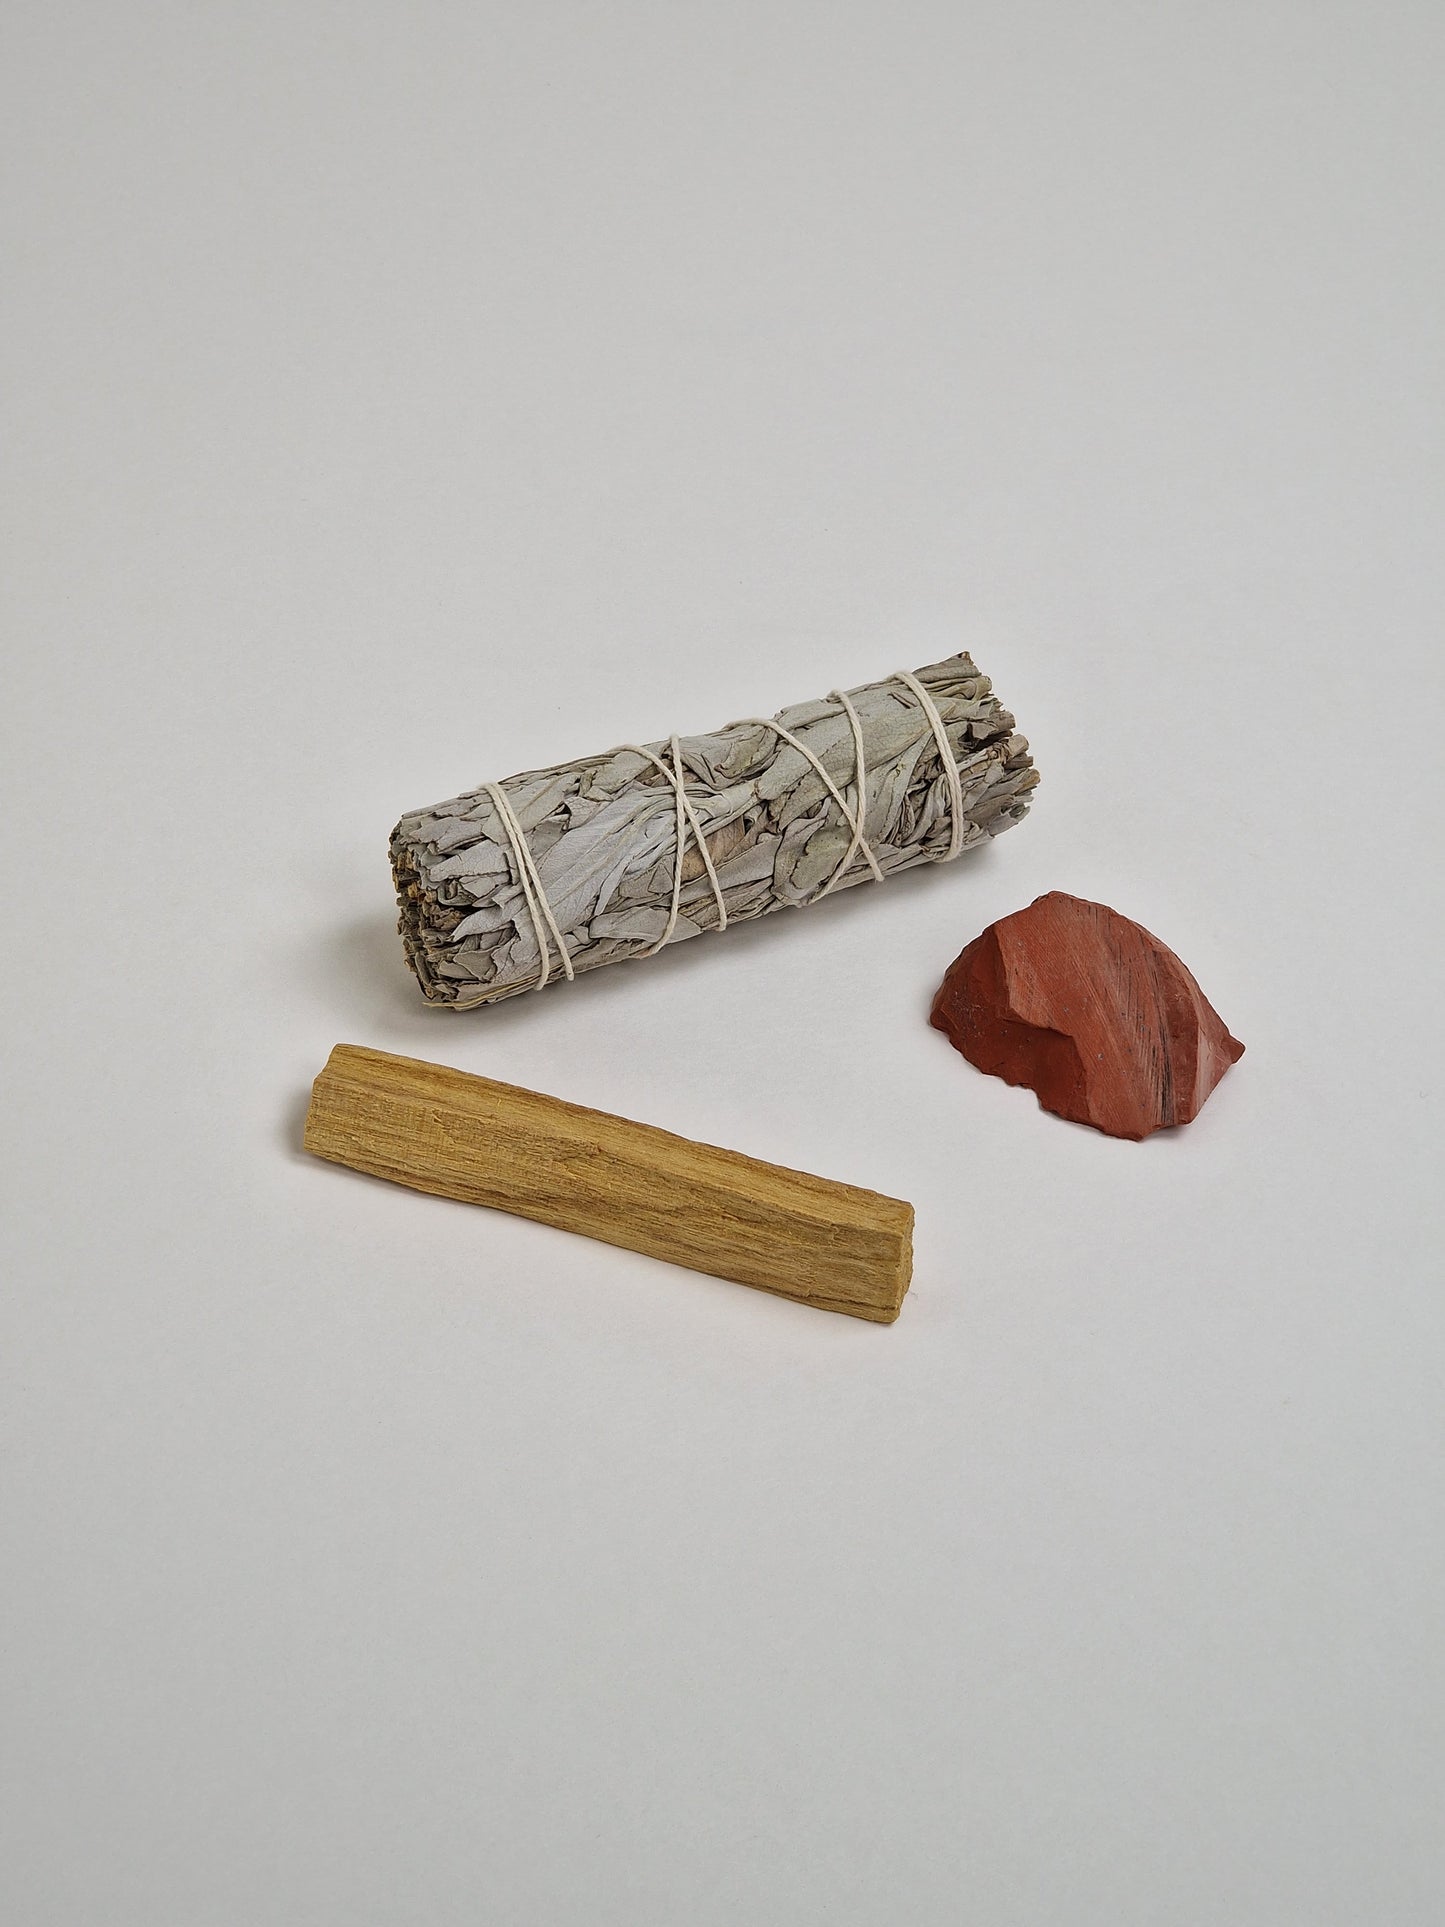 Red Jasper crystal with sage and smudge stick